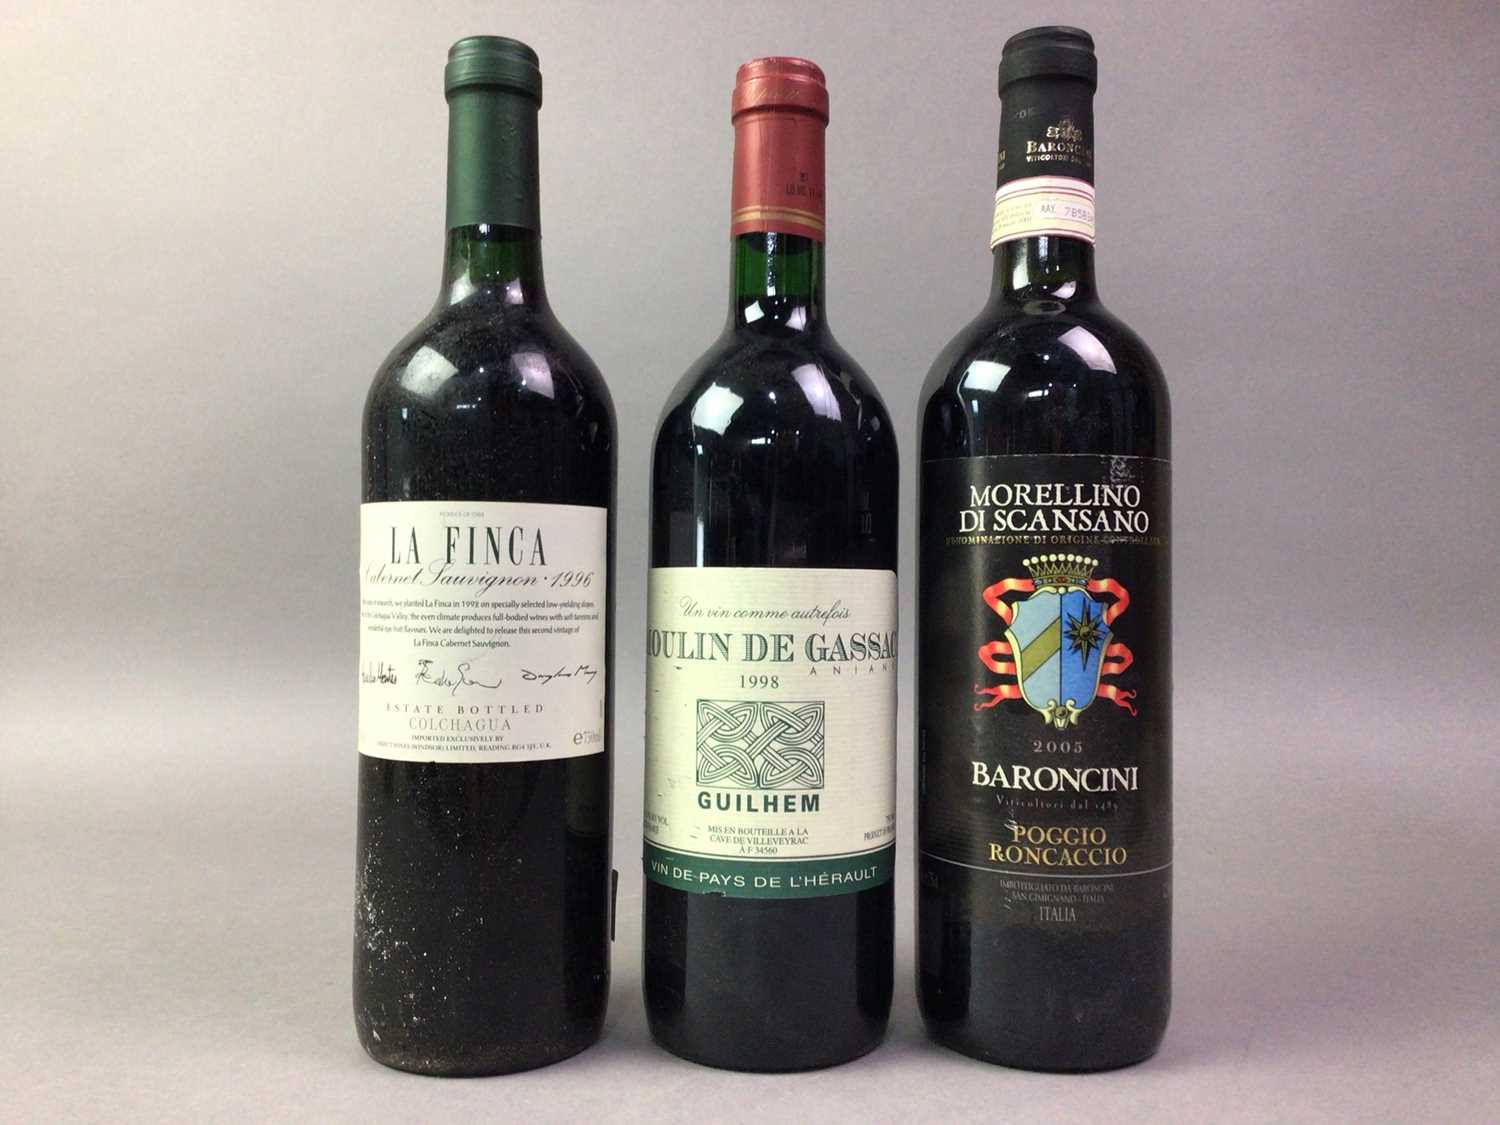 SIX BOTTLES OF RED WINE INCLUDING CHATEAU ROZIER 1990 SAINT-EMILION GRAND CRU - Image 2 of 2